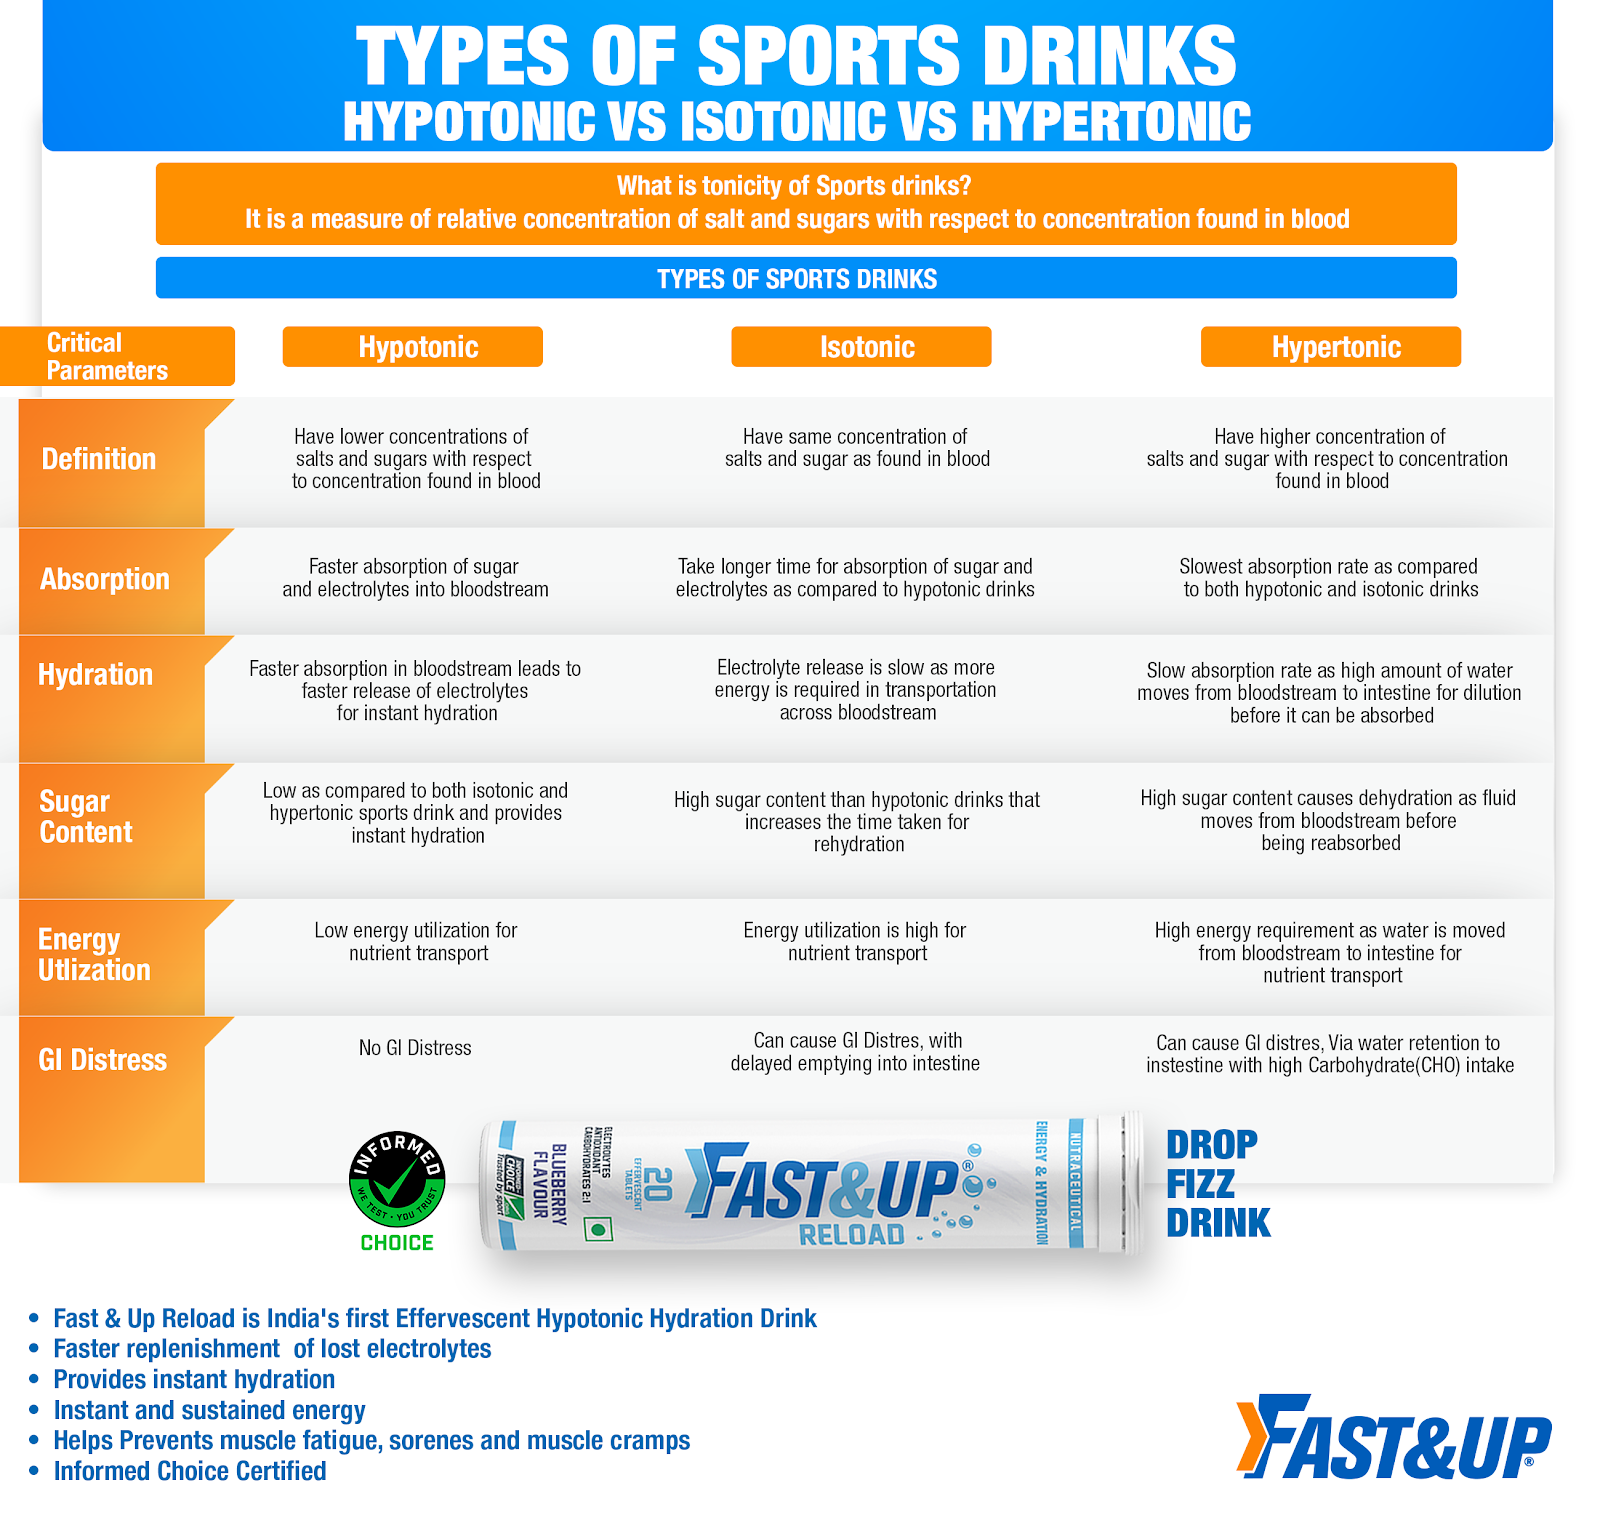 Types of Sports Drinks - fast&Up